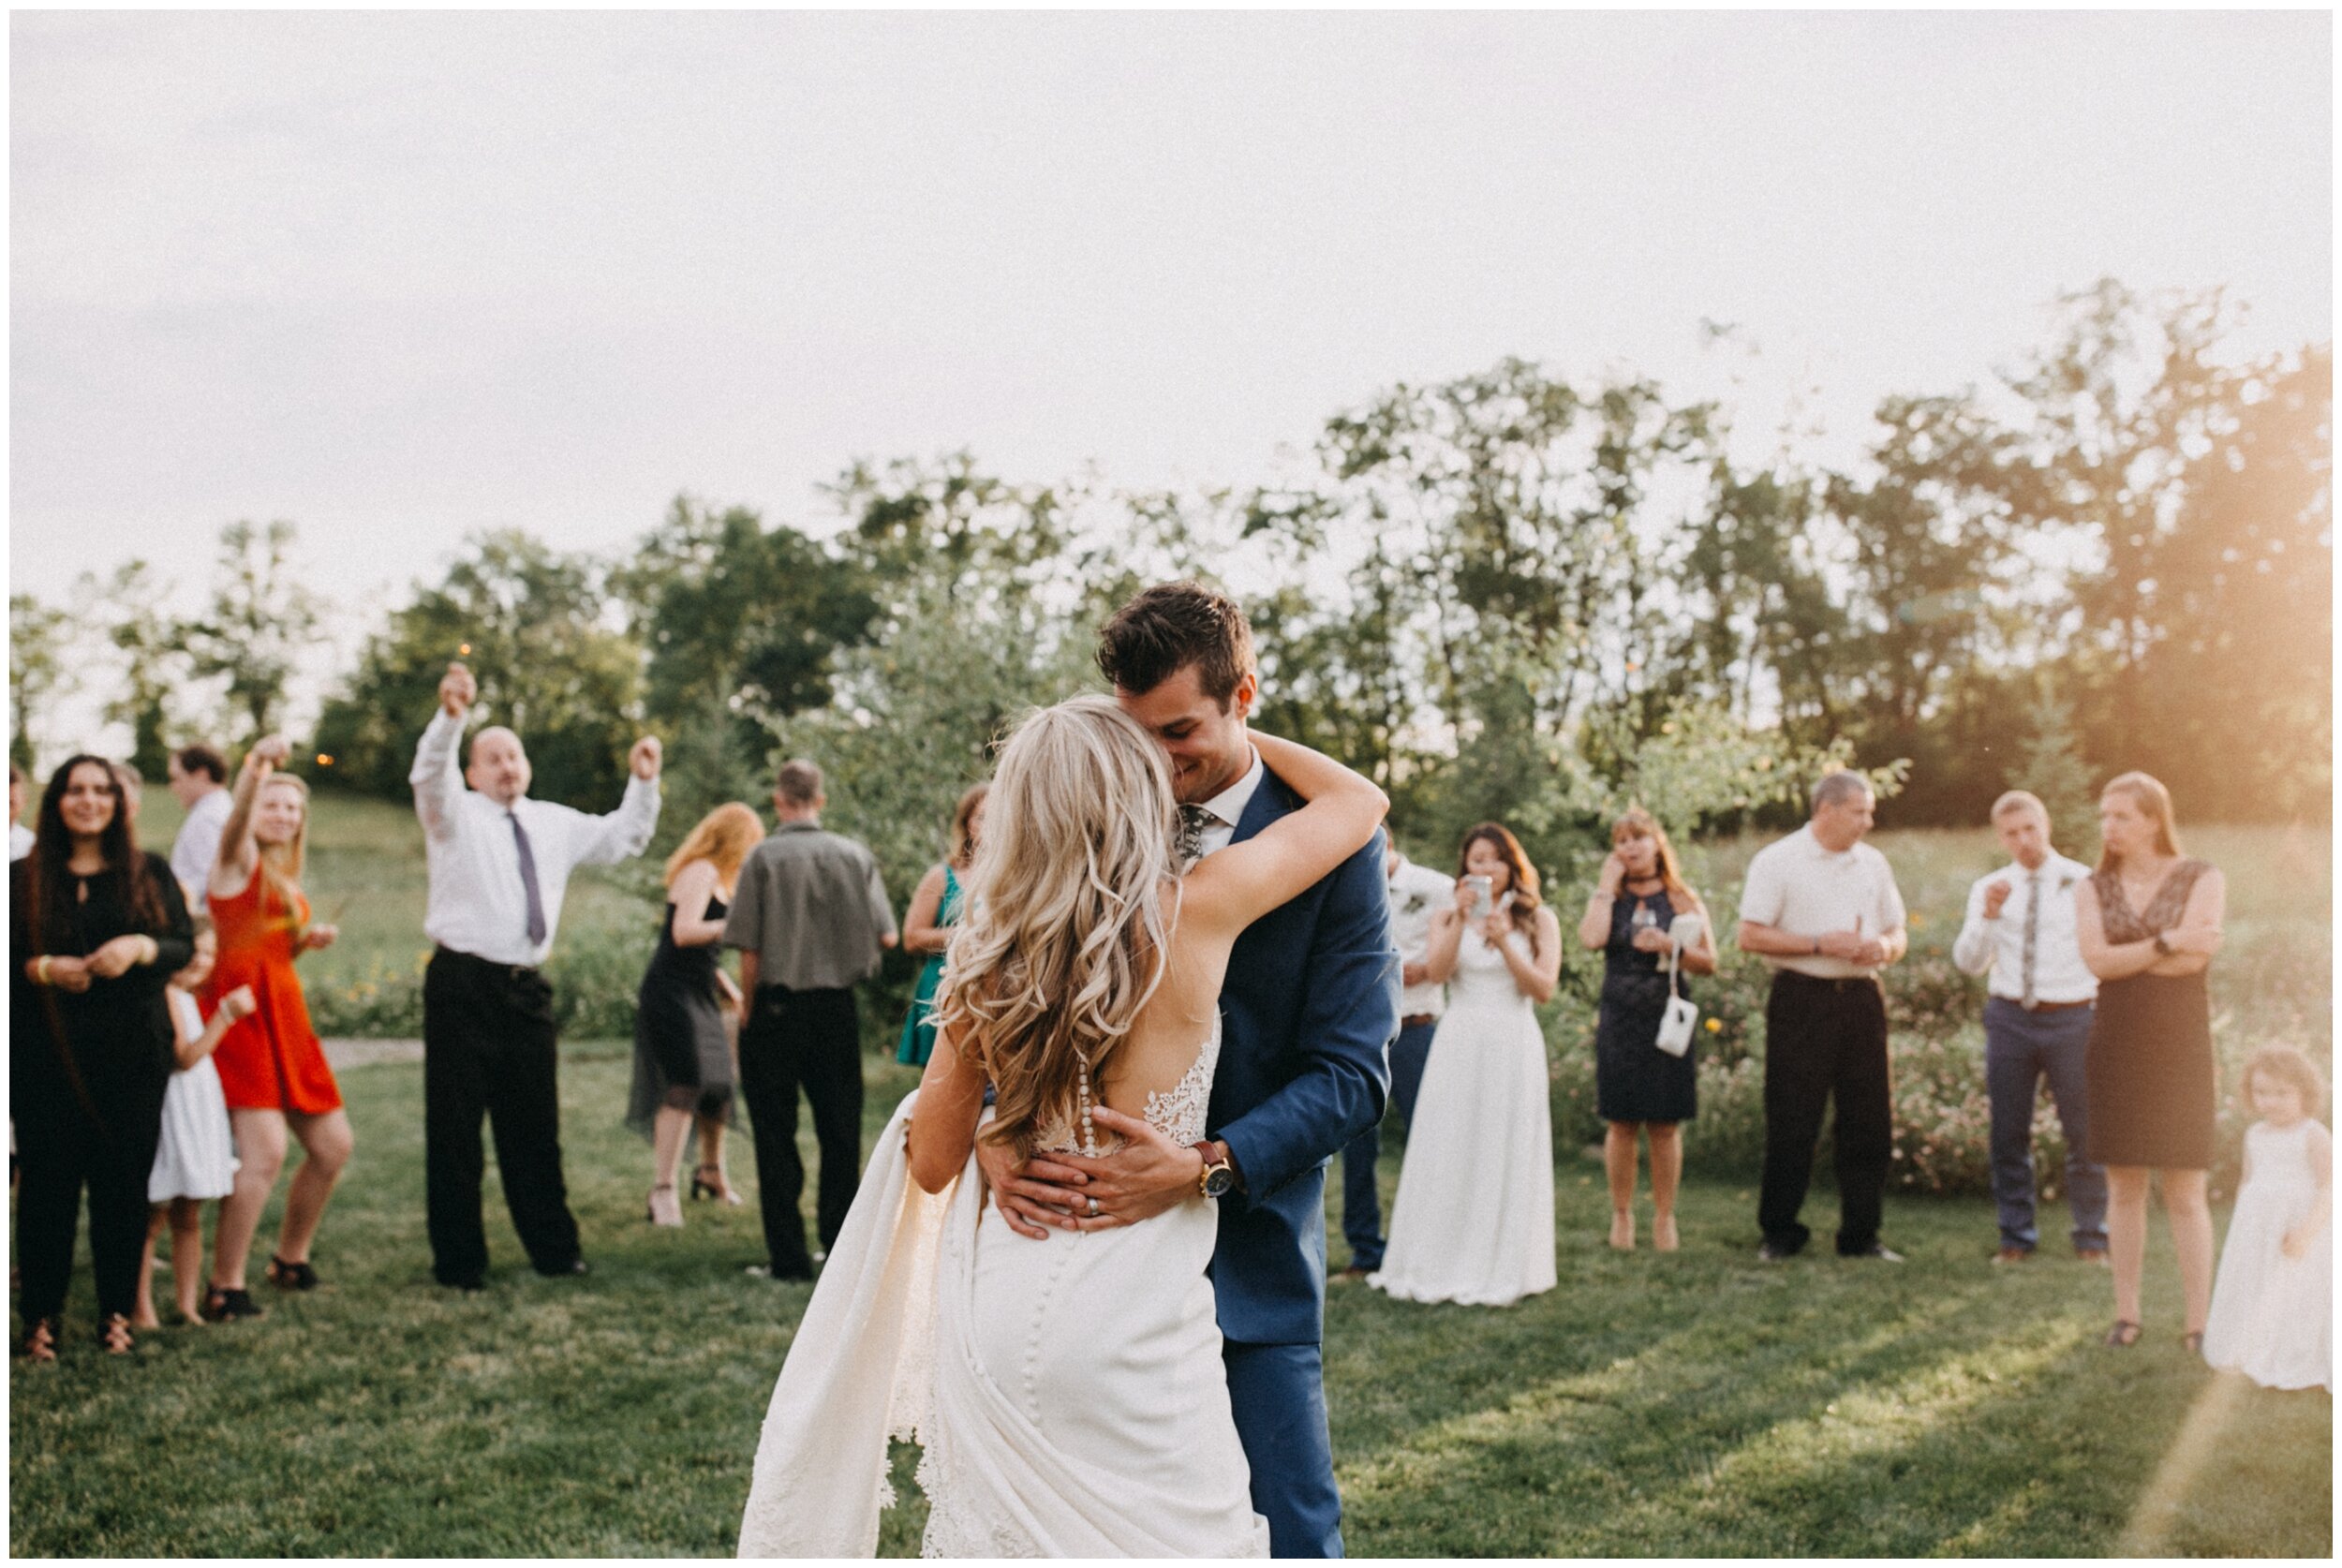 Bride and groom sparkler dance during sunset at Creekside Farm wedding in Rush City Minnesota